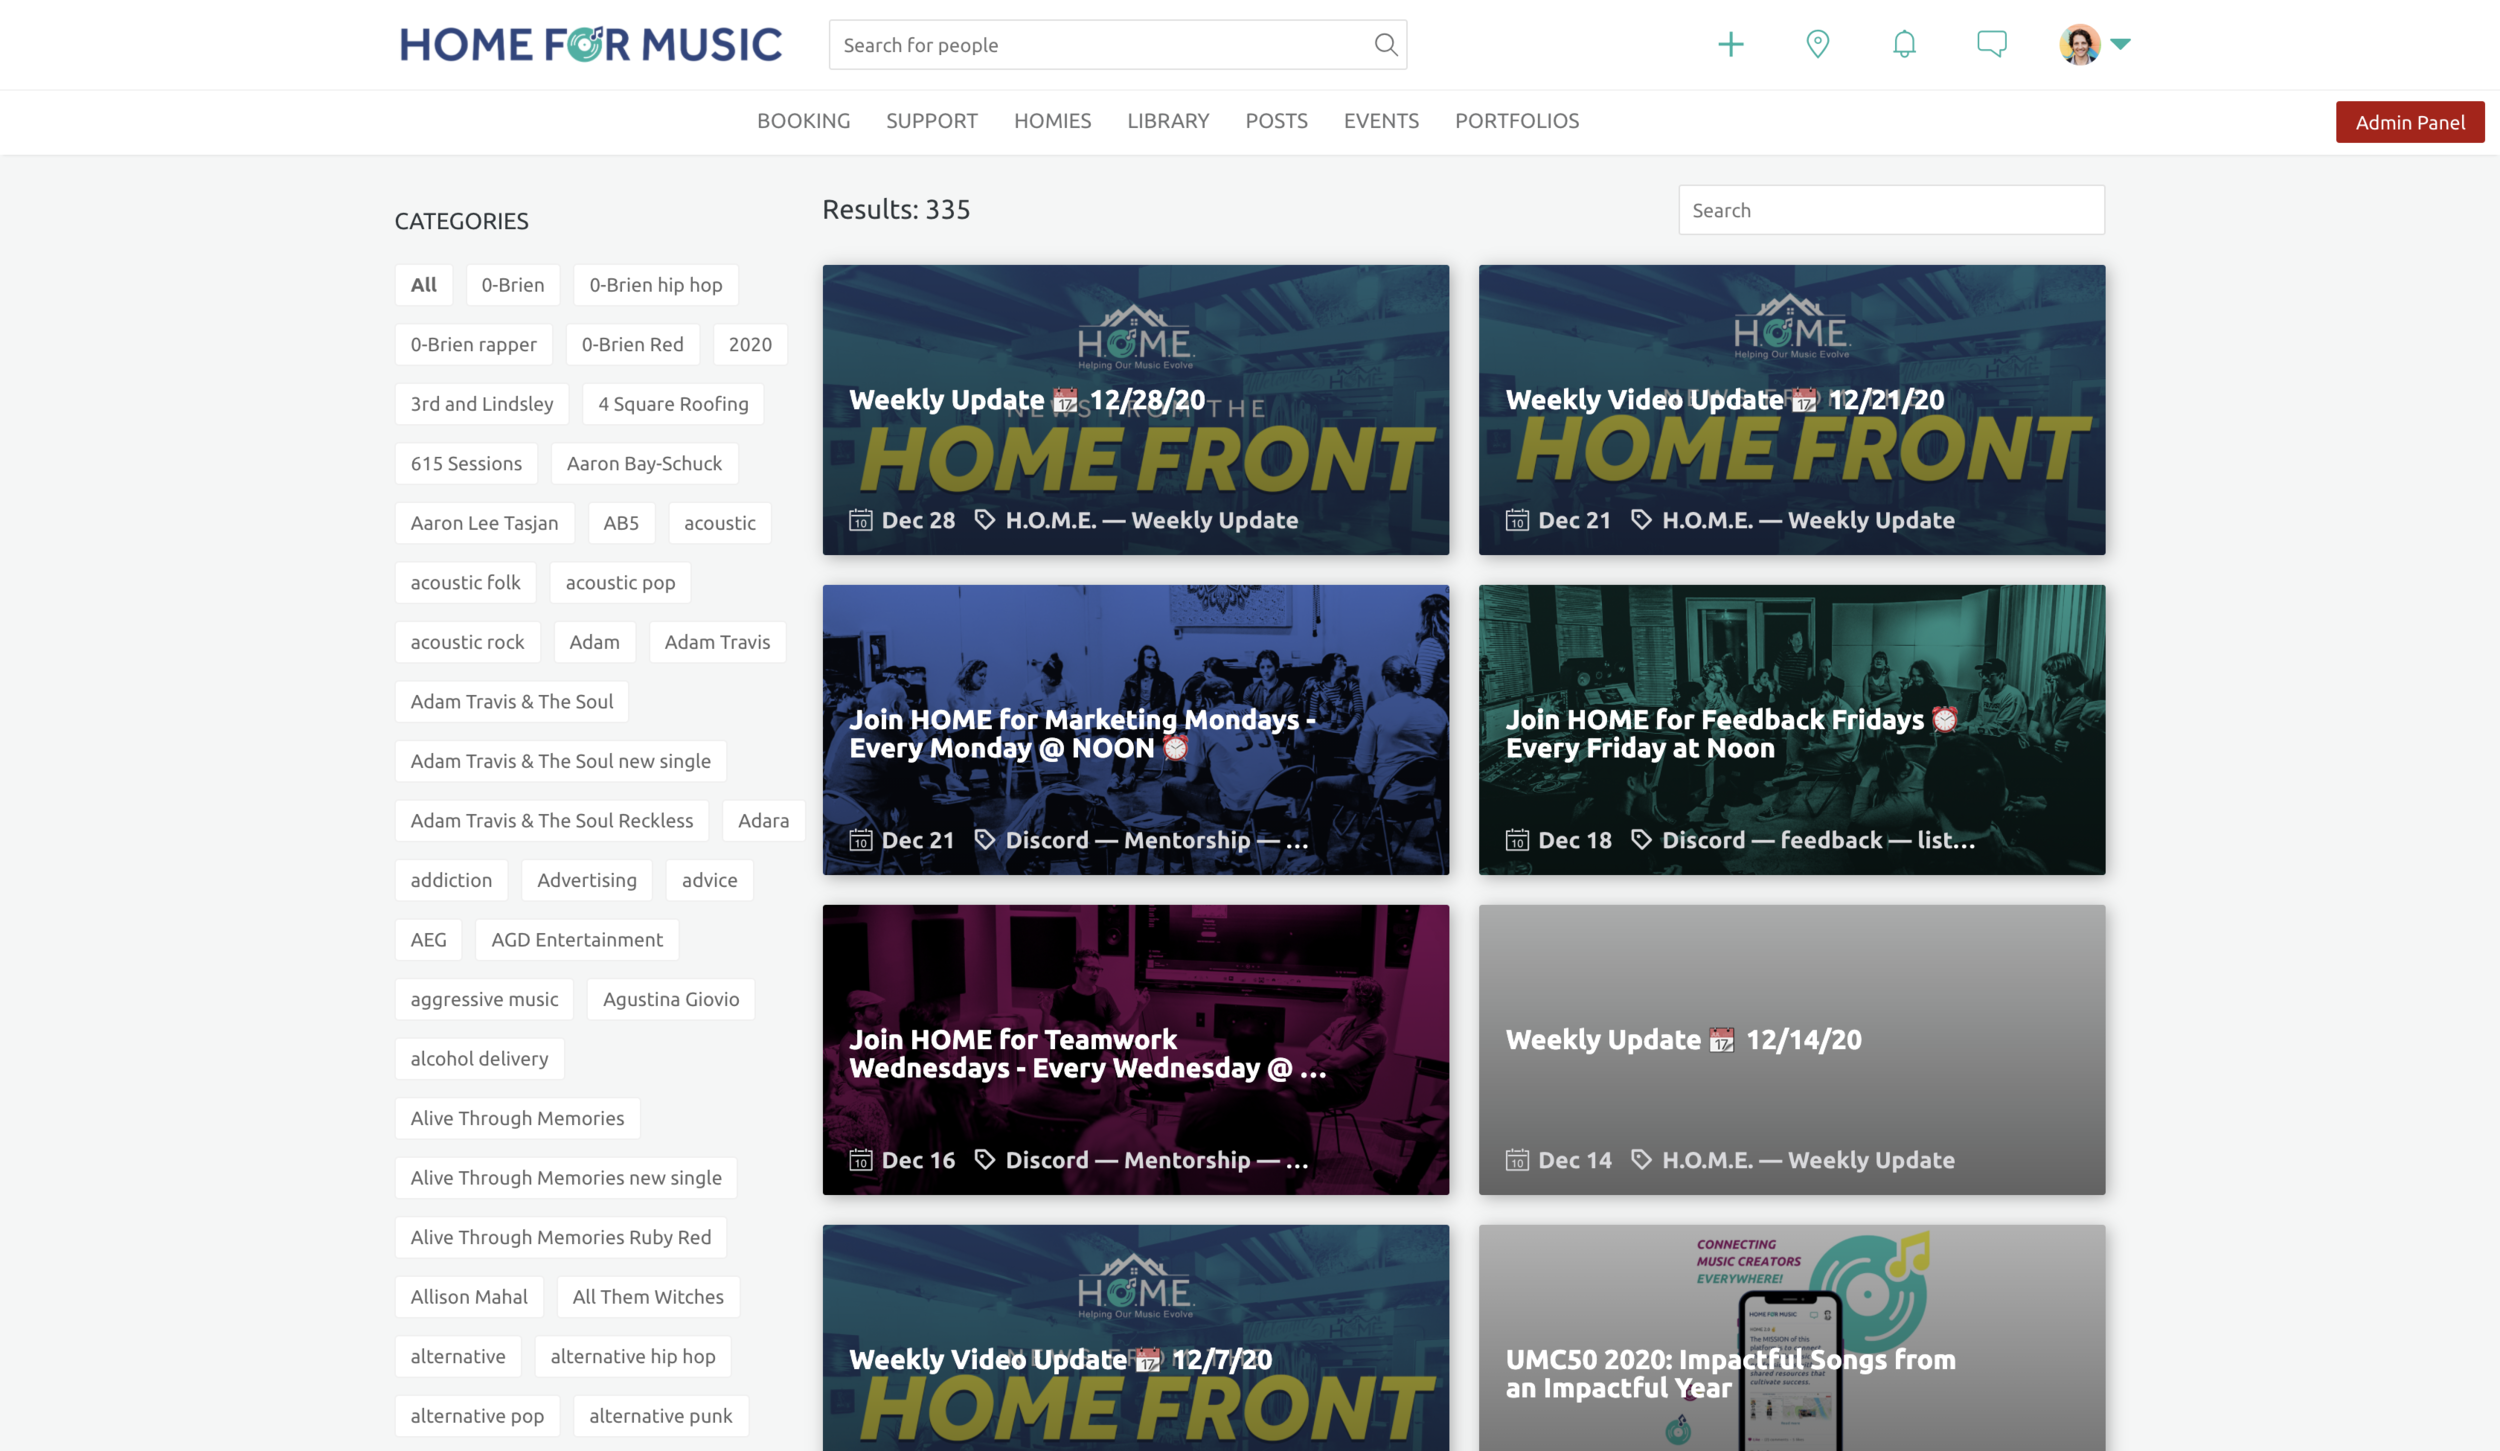 home-for-music-events